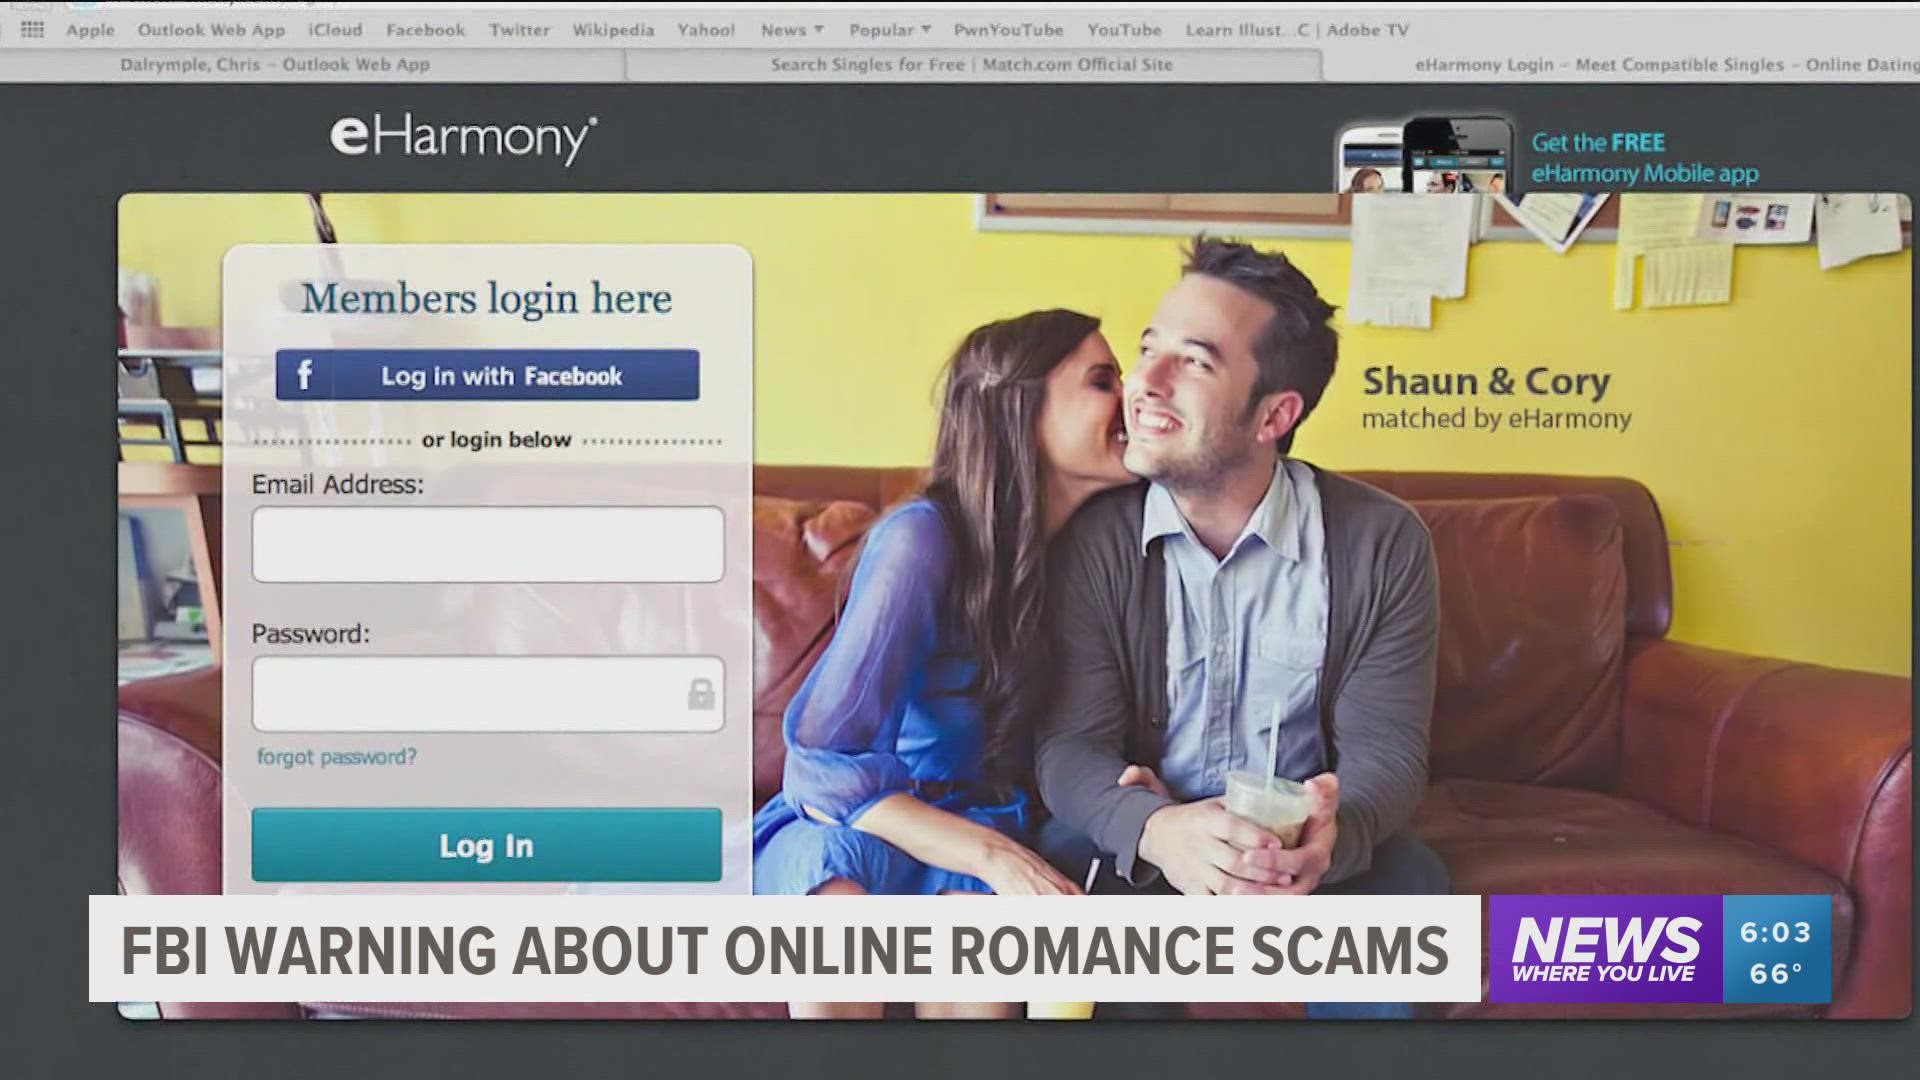 The FBI is warning people of online romance scams and how to avoid them or even flush them out.